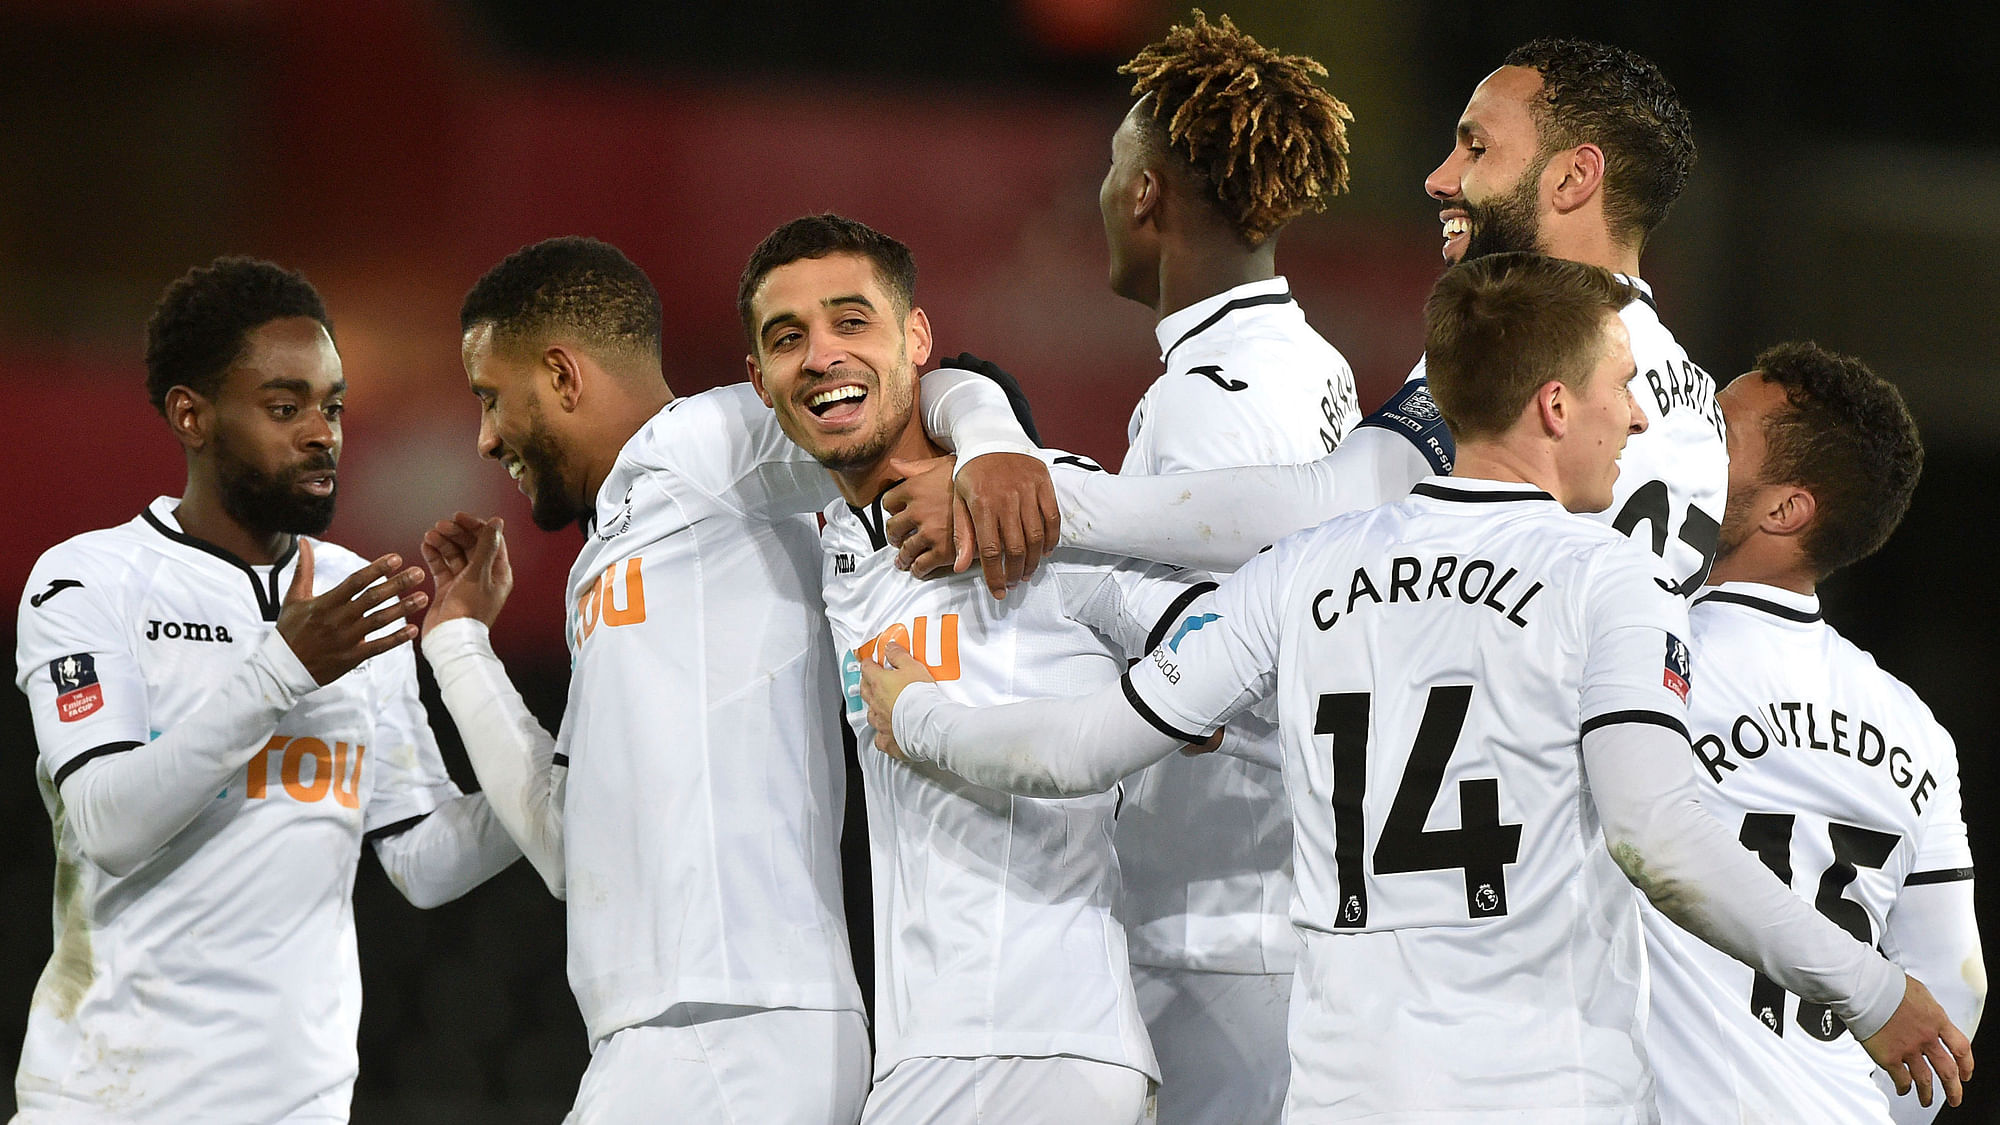 Swansea City’s Kyle Naughton celebrates with his team-mates after scoring his side’s fifth goal.<a></a>